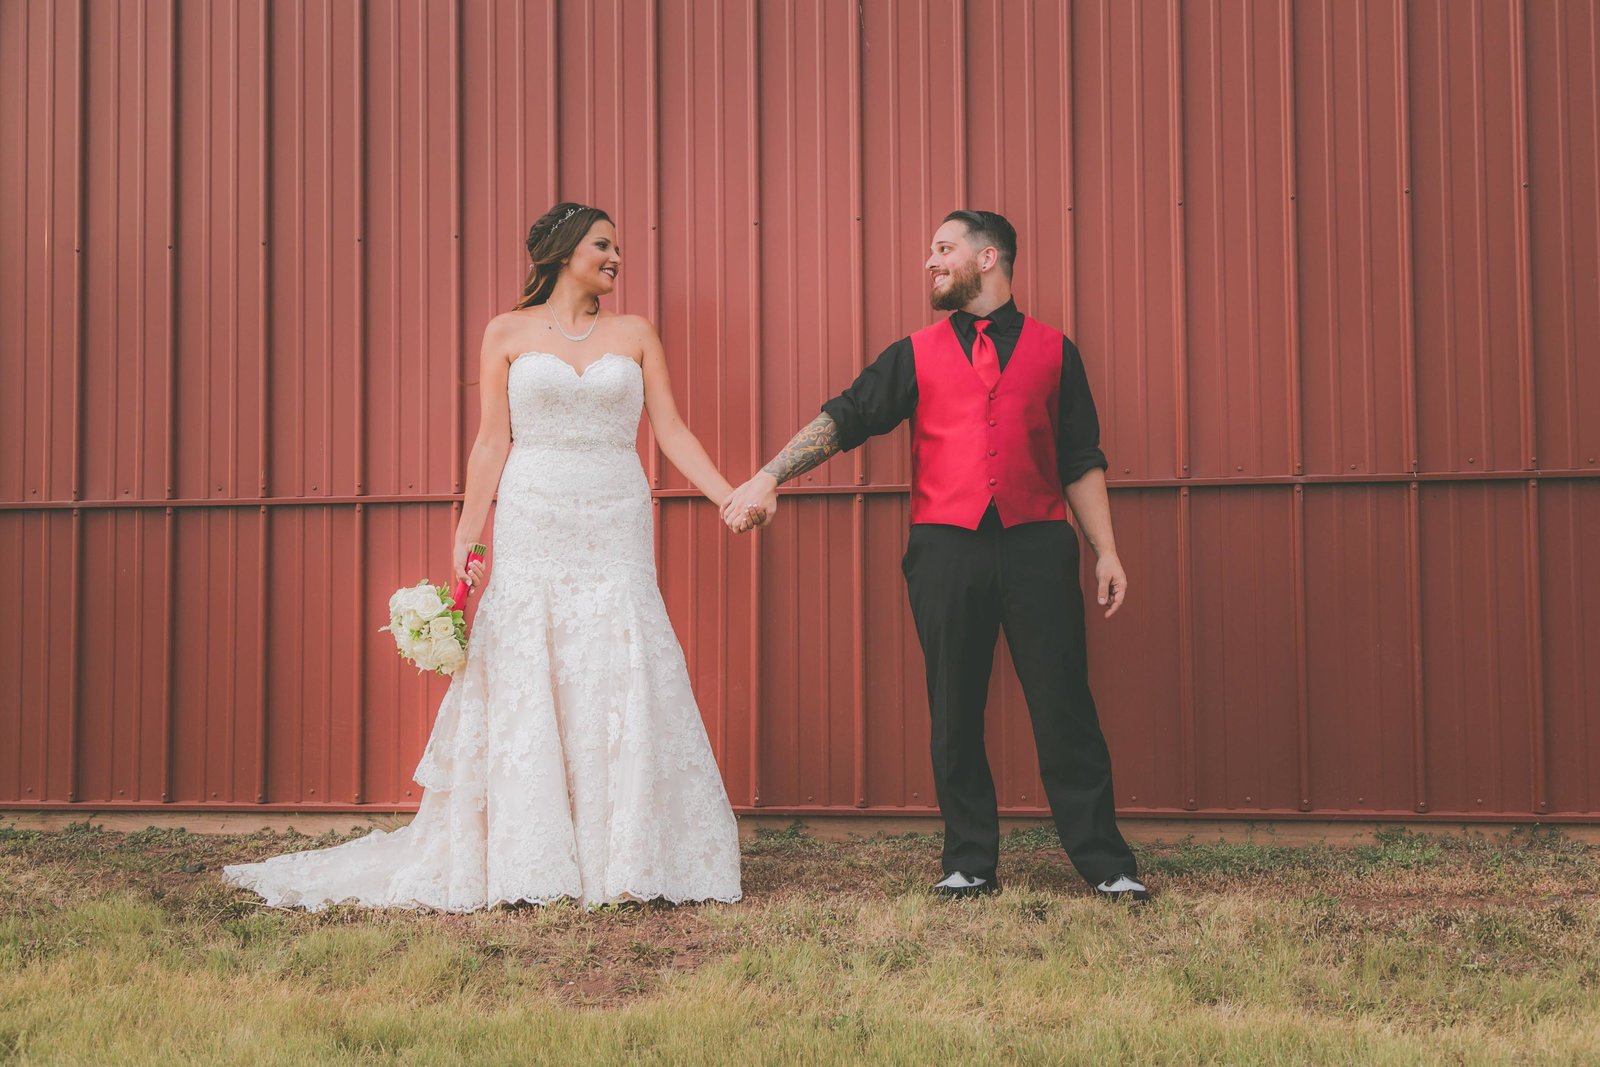 Bride and groom hold hands and look at one another against red barn background.